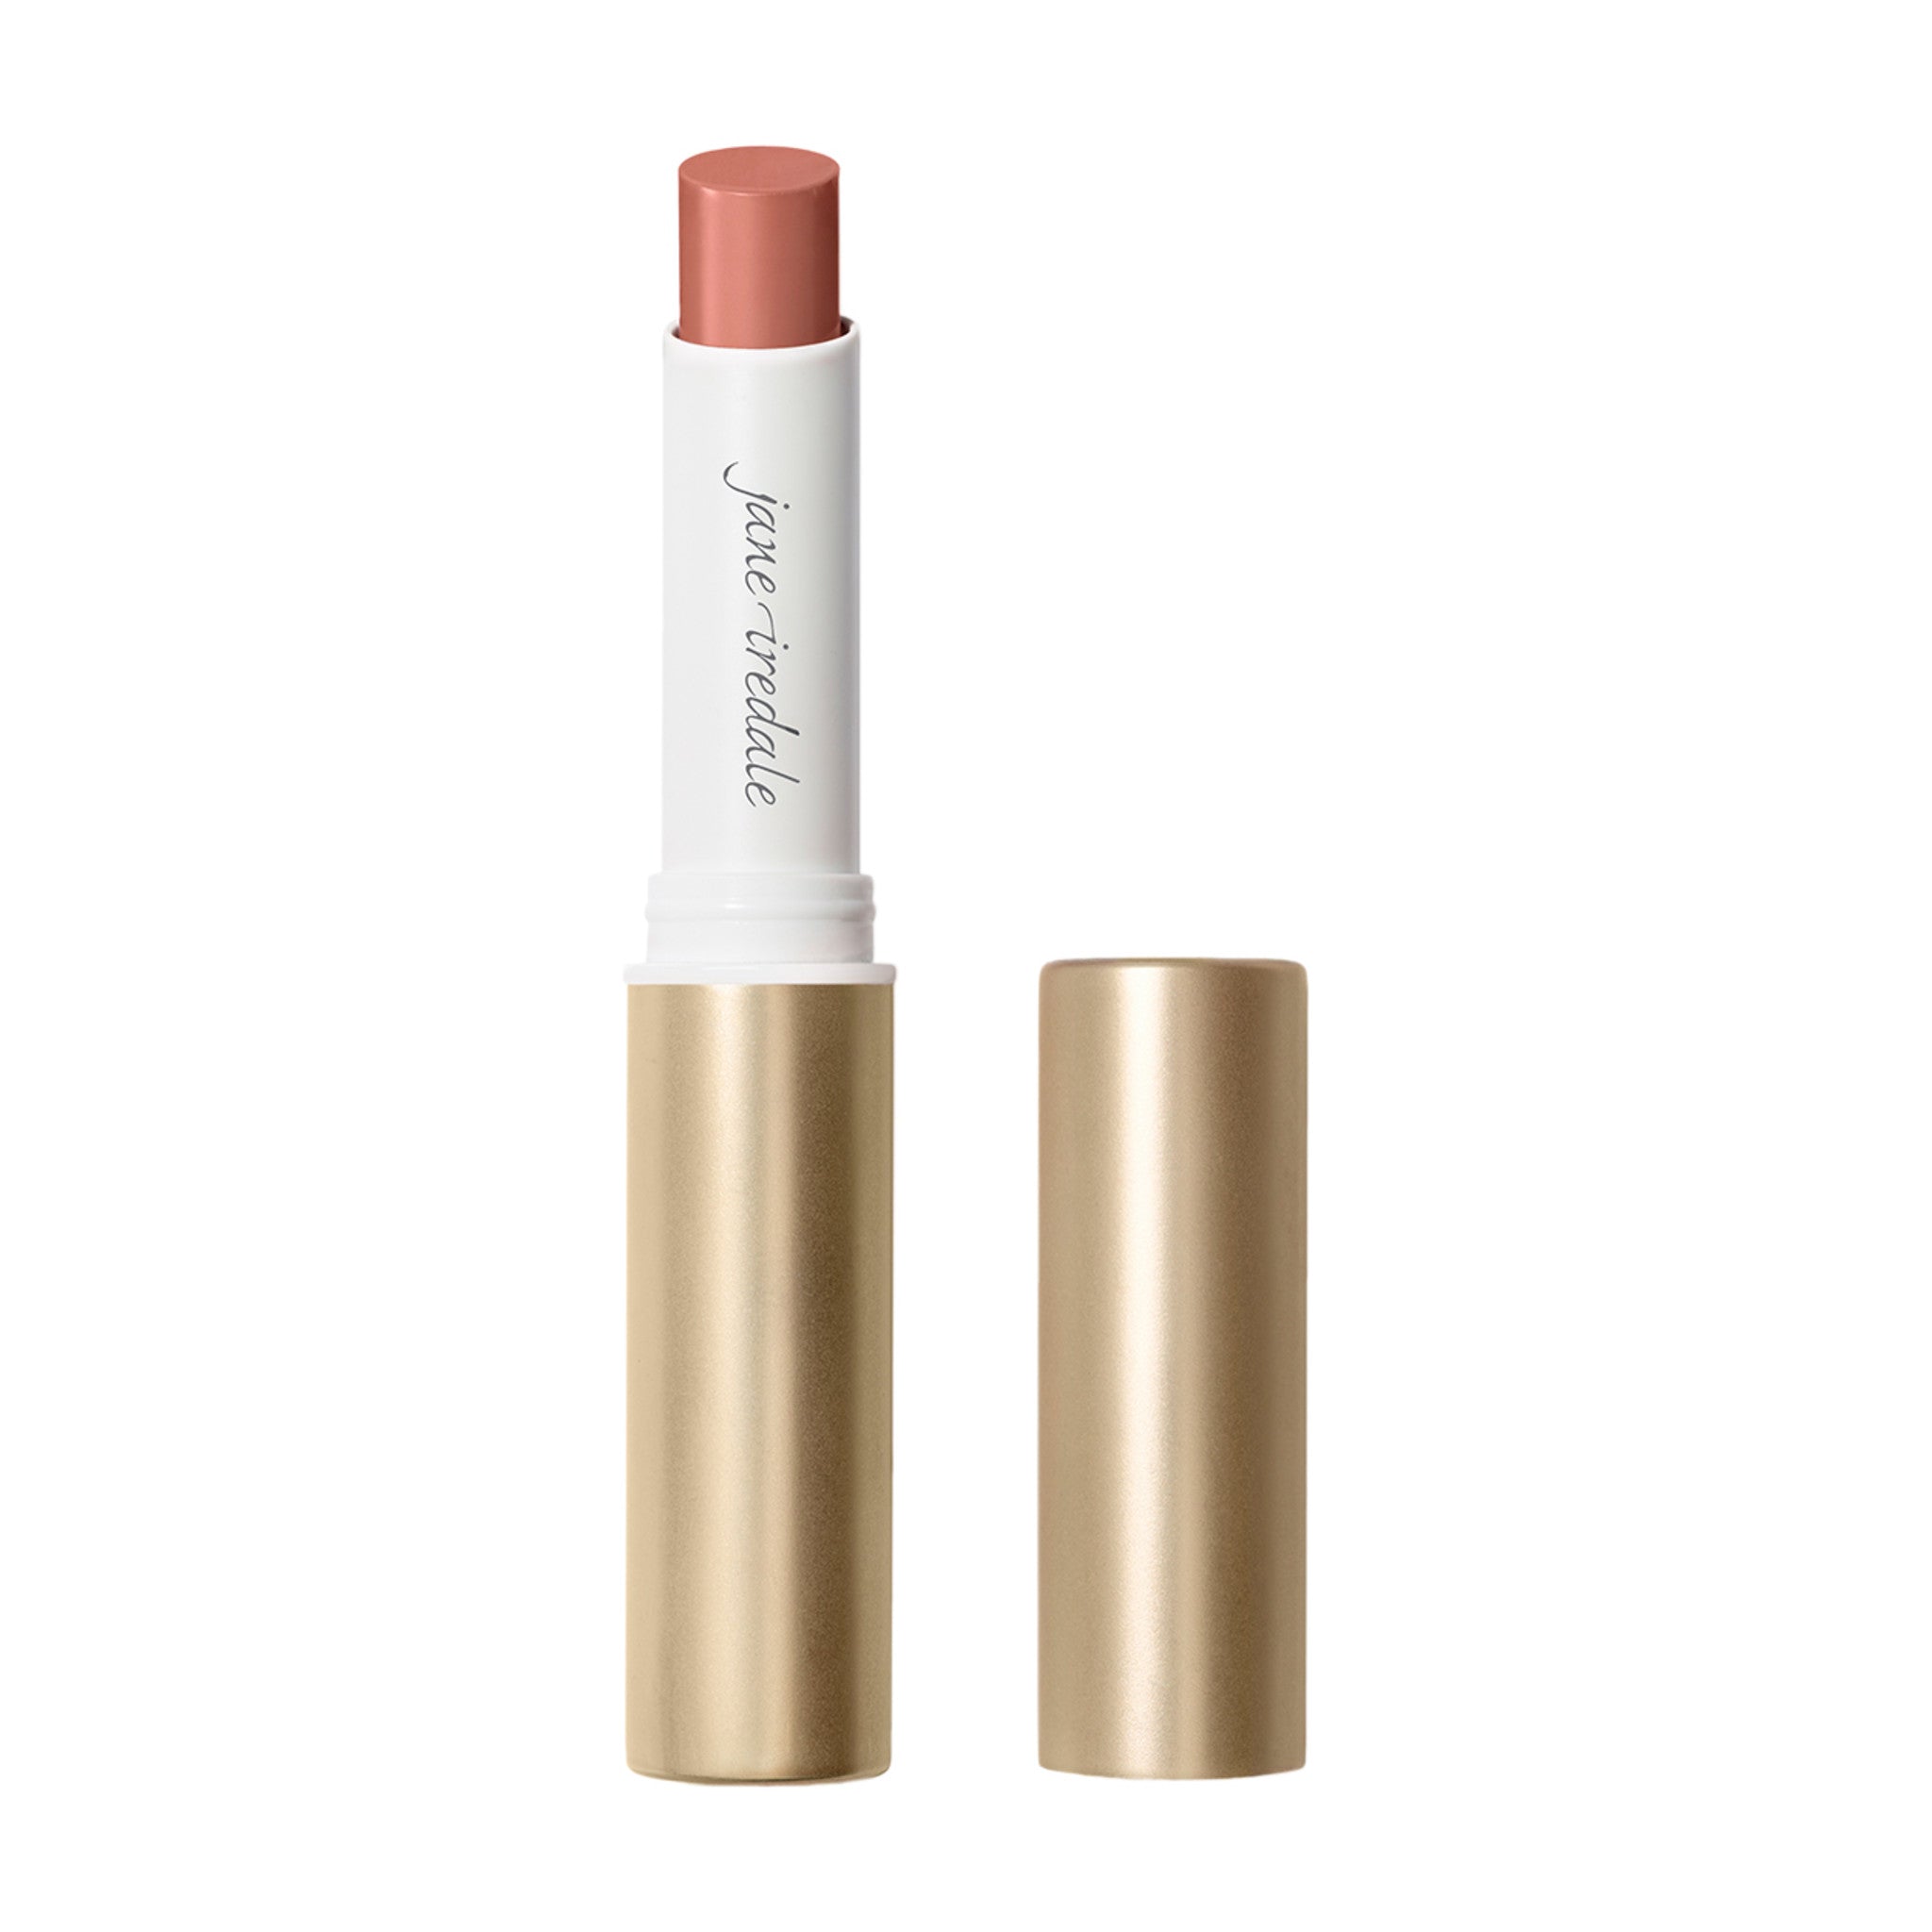 Jane Iredale ColorLuxe Hydrating Cream Lipstick Color/Shade variant: Bellini main image. This product is in the color pink